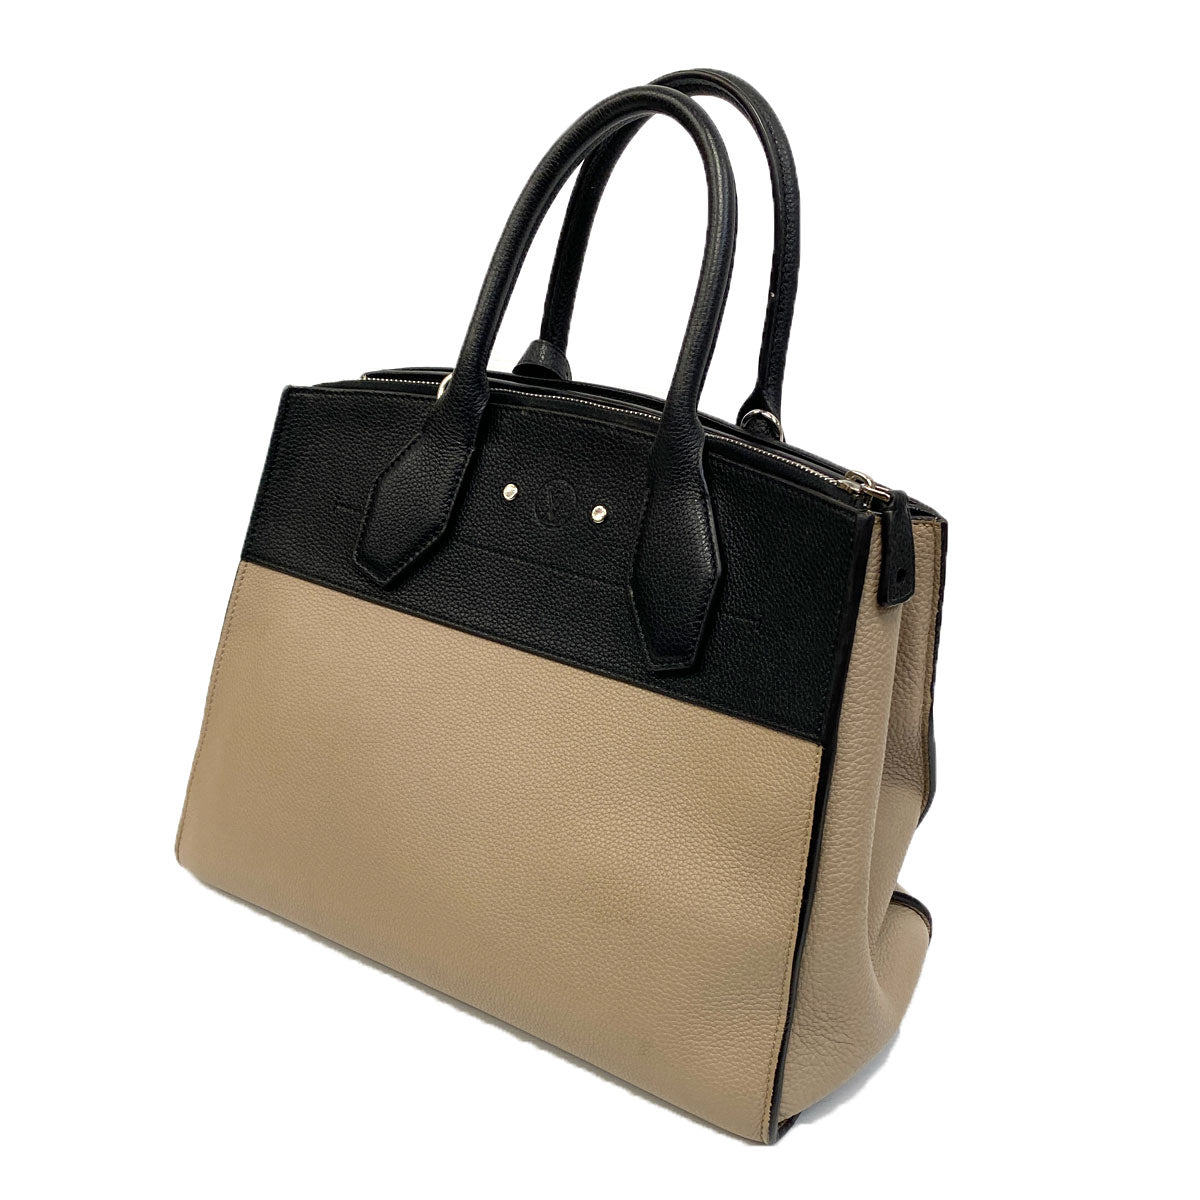 Sac City Steamer MM in beige leather